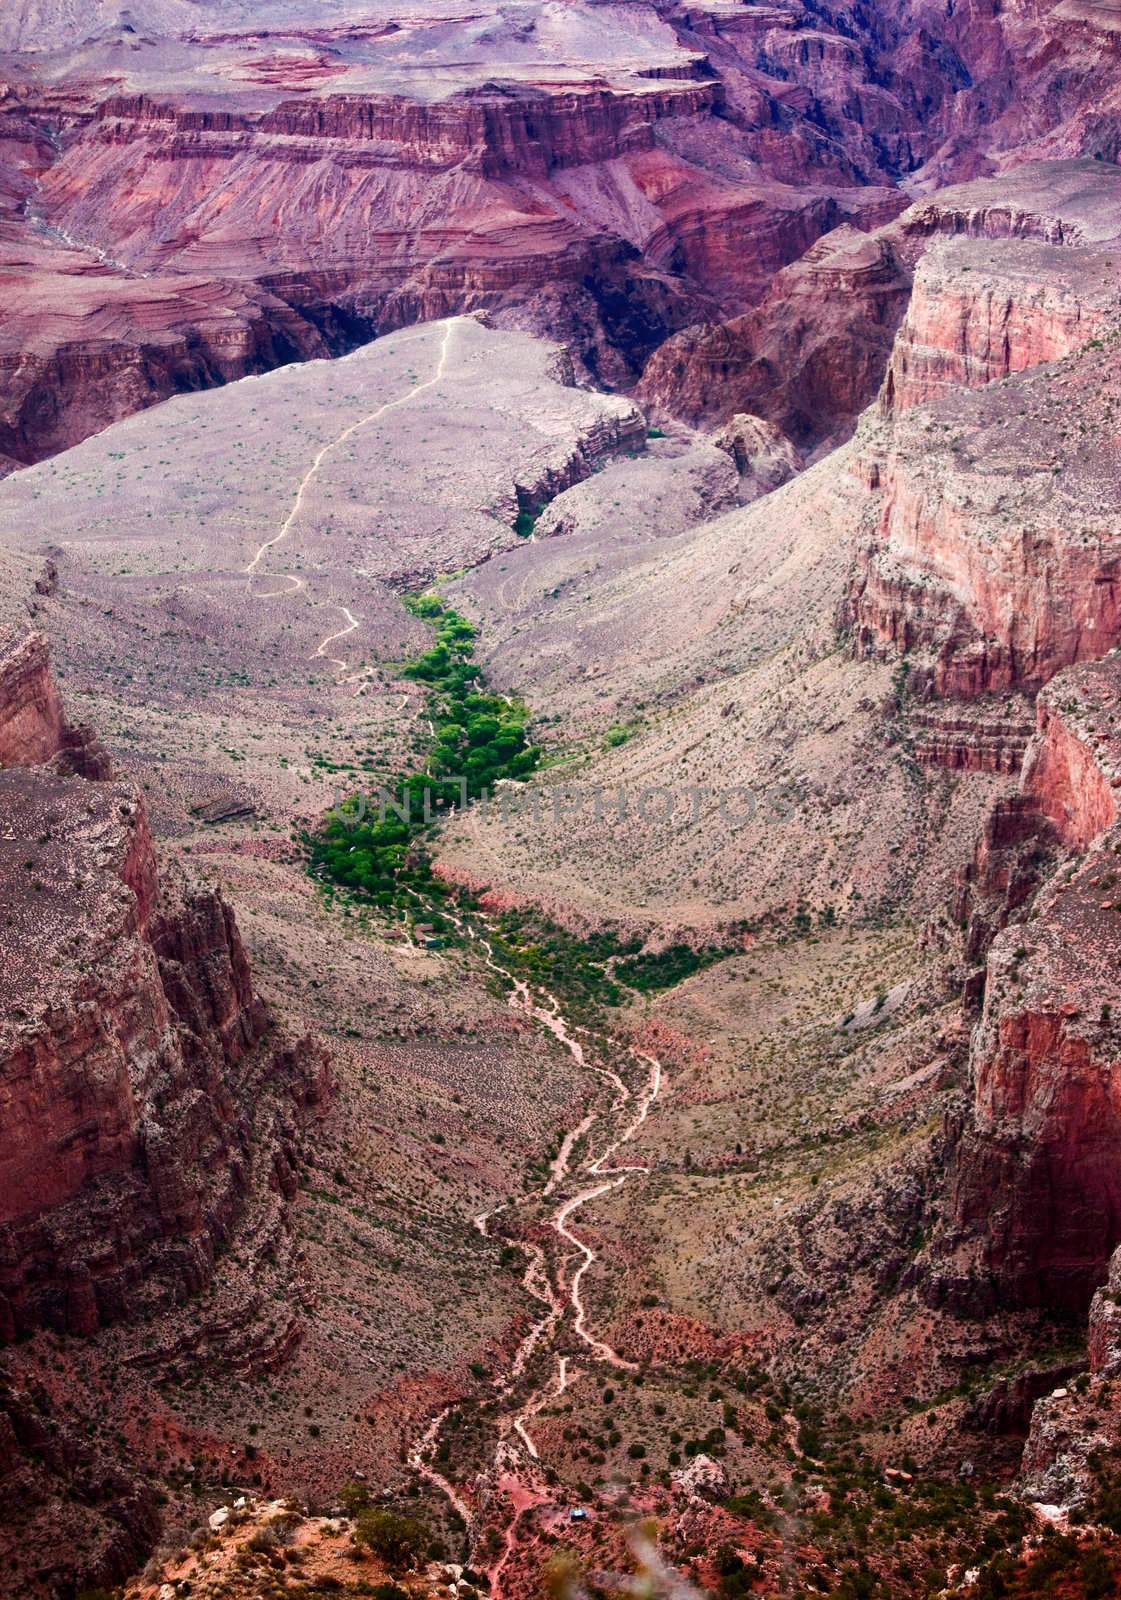 View of Bright Angel Trail from the South Rim